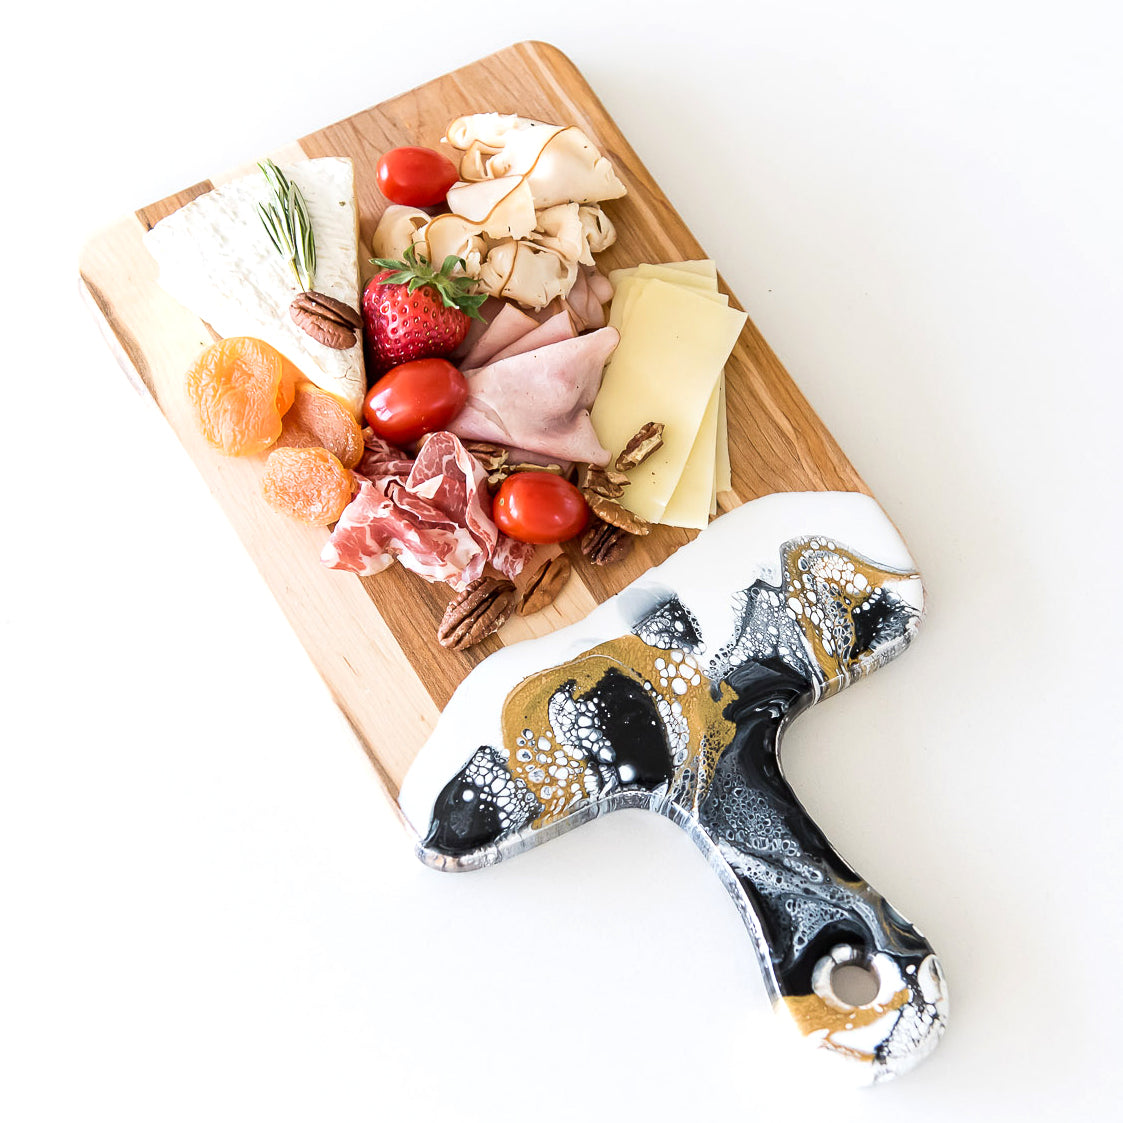 Acacia Resin Cheeseboard with fruit cheese and meat.